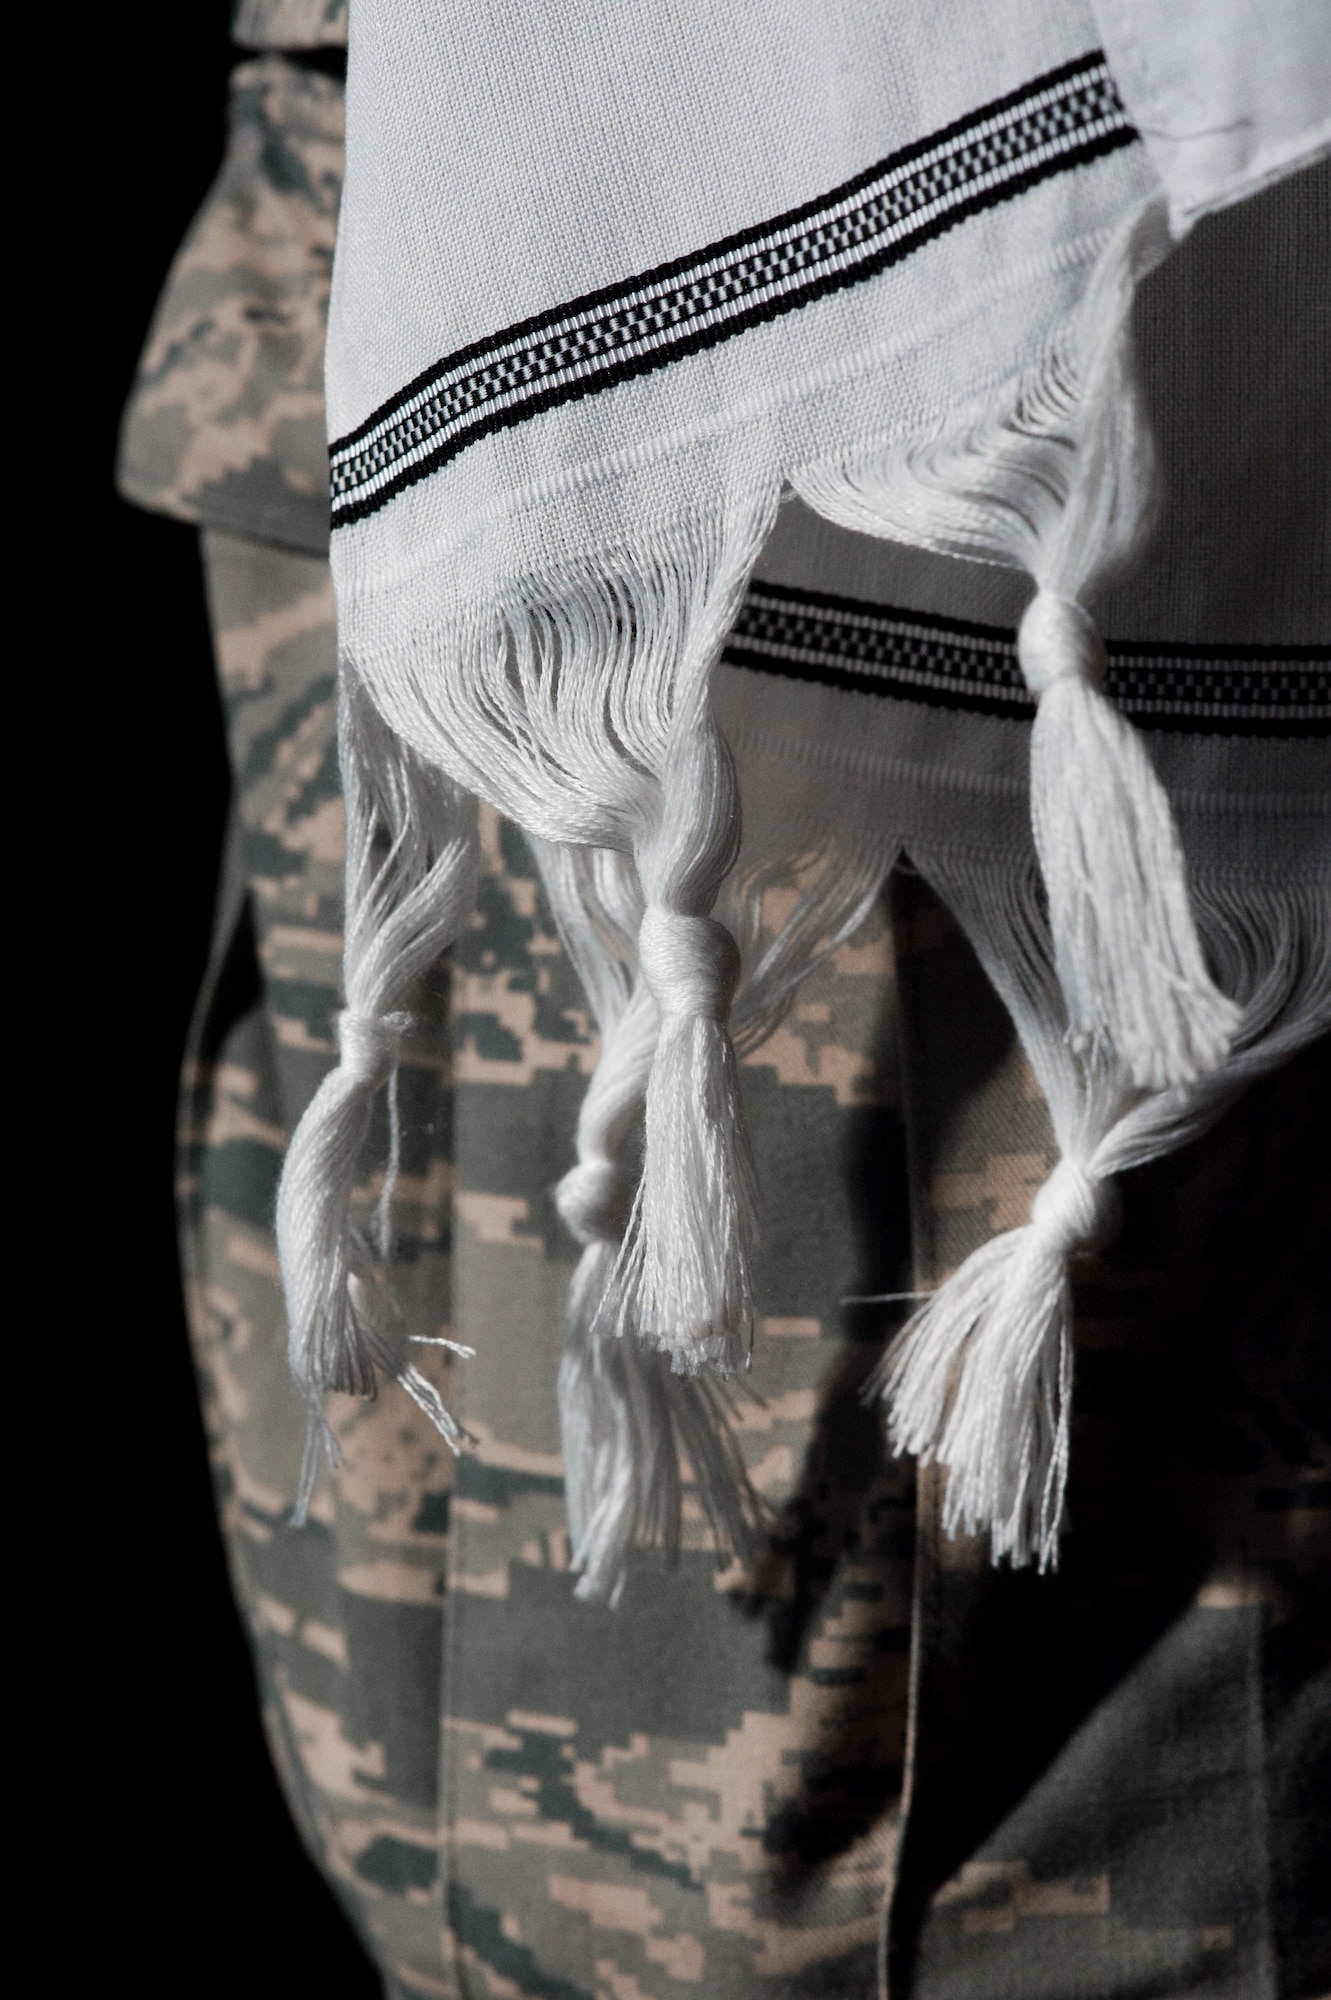 The tzit tzit, knotted fringe at the end of the prayer shawl worn by U.S. Air Force Rabbi, Chaplain, Captain Sarah D. Schechter during the evening le'il shabbat service on Friday, Sept. 4, 2009 symbolize the 613 commandments in the Torah.  At Lackland Air Force Base's Airmen Memorial Chapel more than 25 basic military trainees and other attendees participated in a religious education class, then Ma'ariv prayer service for the setting of the sun, followed by a meal provided by lay leaders supporting the service. Because of training schedules some ceremonies and events are earlier than traditionally held. By order of commanders, those who want to attend any or all religious services of their choosing are given full permission and opportunity to do so.  Chaplain, Captain Schechter is an Operation Iraqi Freedom veteran and considers her deployment there to be one of the highlights of her career. Schechter is the first woman rabbi in the U.S. Air Force. (U.S. Air Force photo/Lance Cheung)

